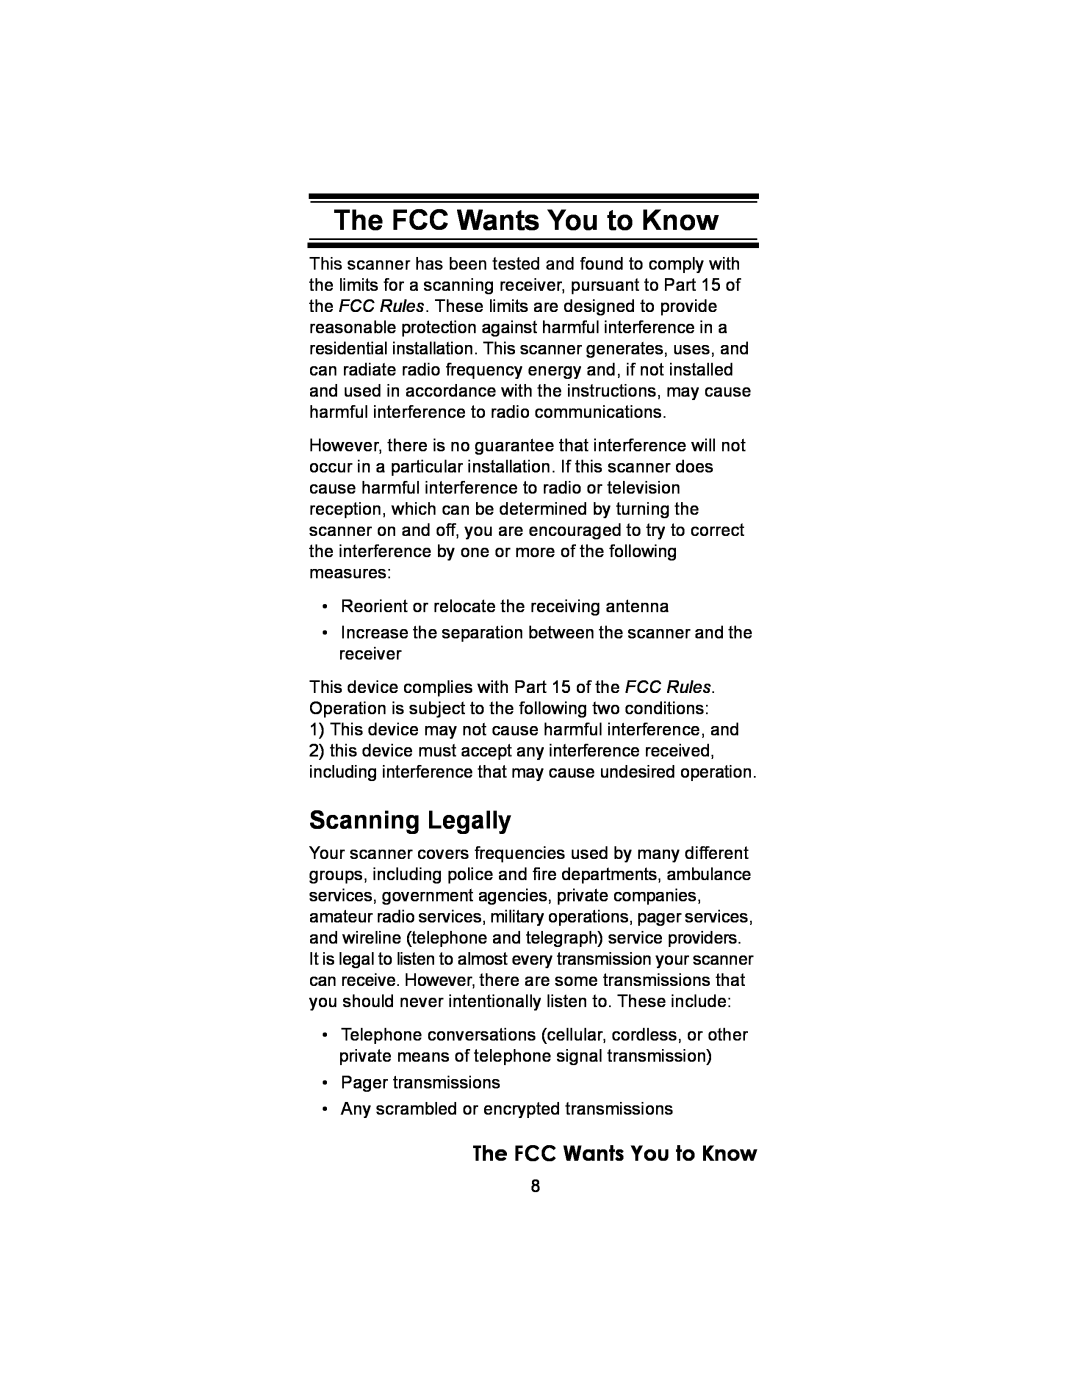 Uniden BC246T owner manual The FCC Wants You to Know, Scanning Legally 